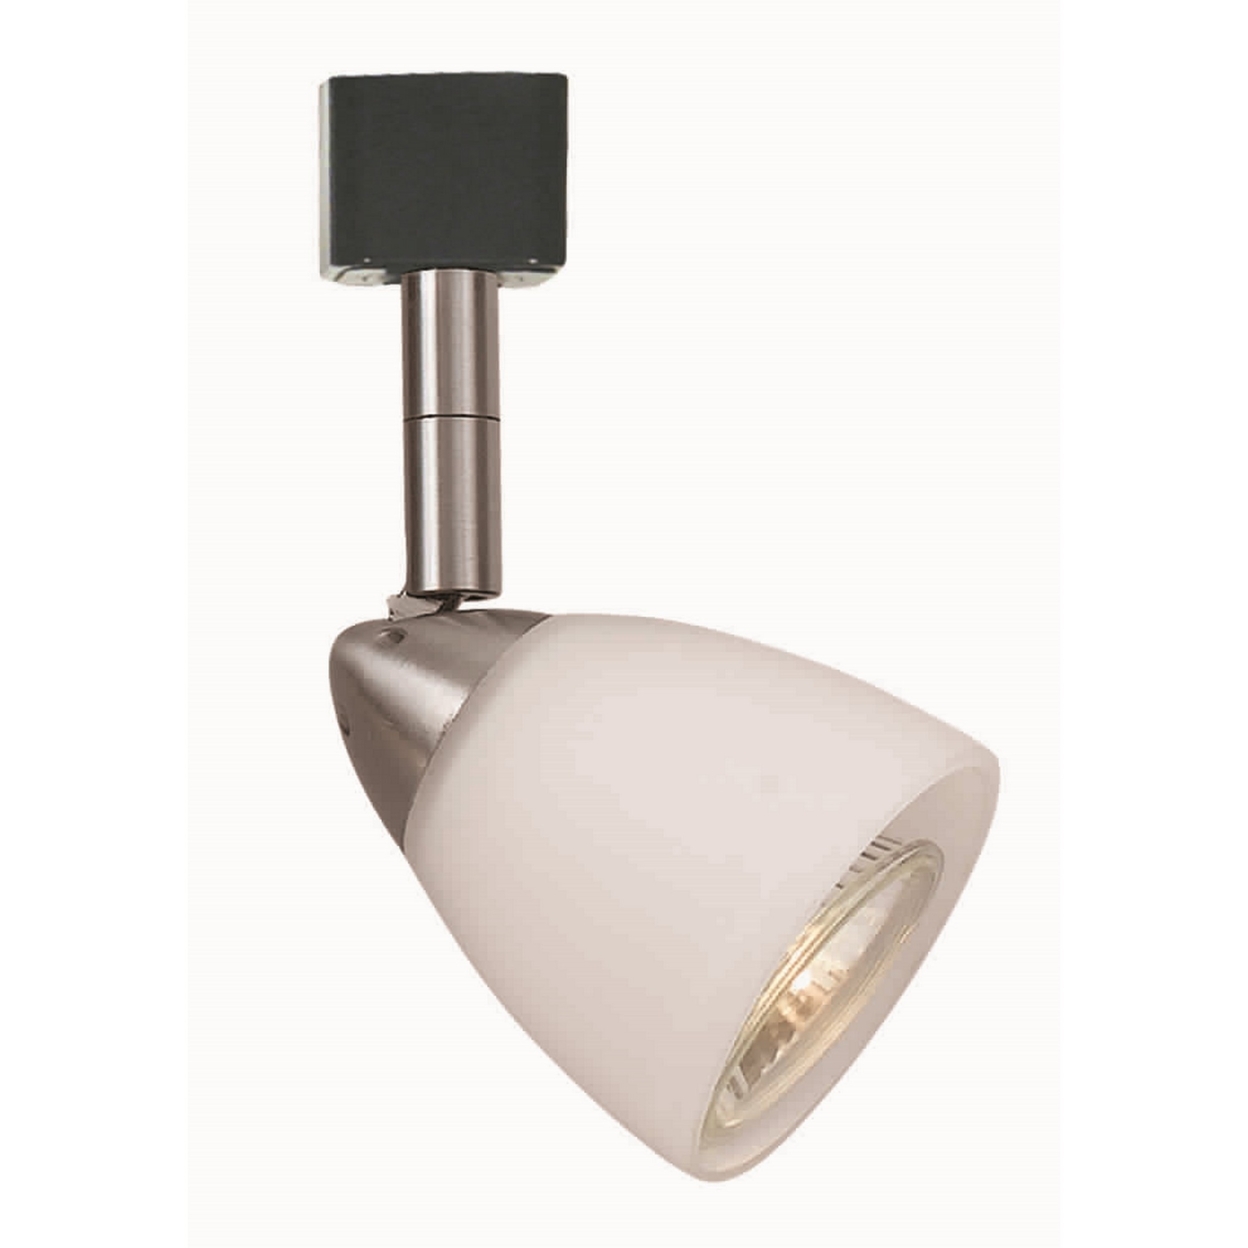 Metal Track Light With Interchangeable Round Glass Shade, Silver And White- Saltoro Sherpi